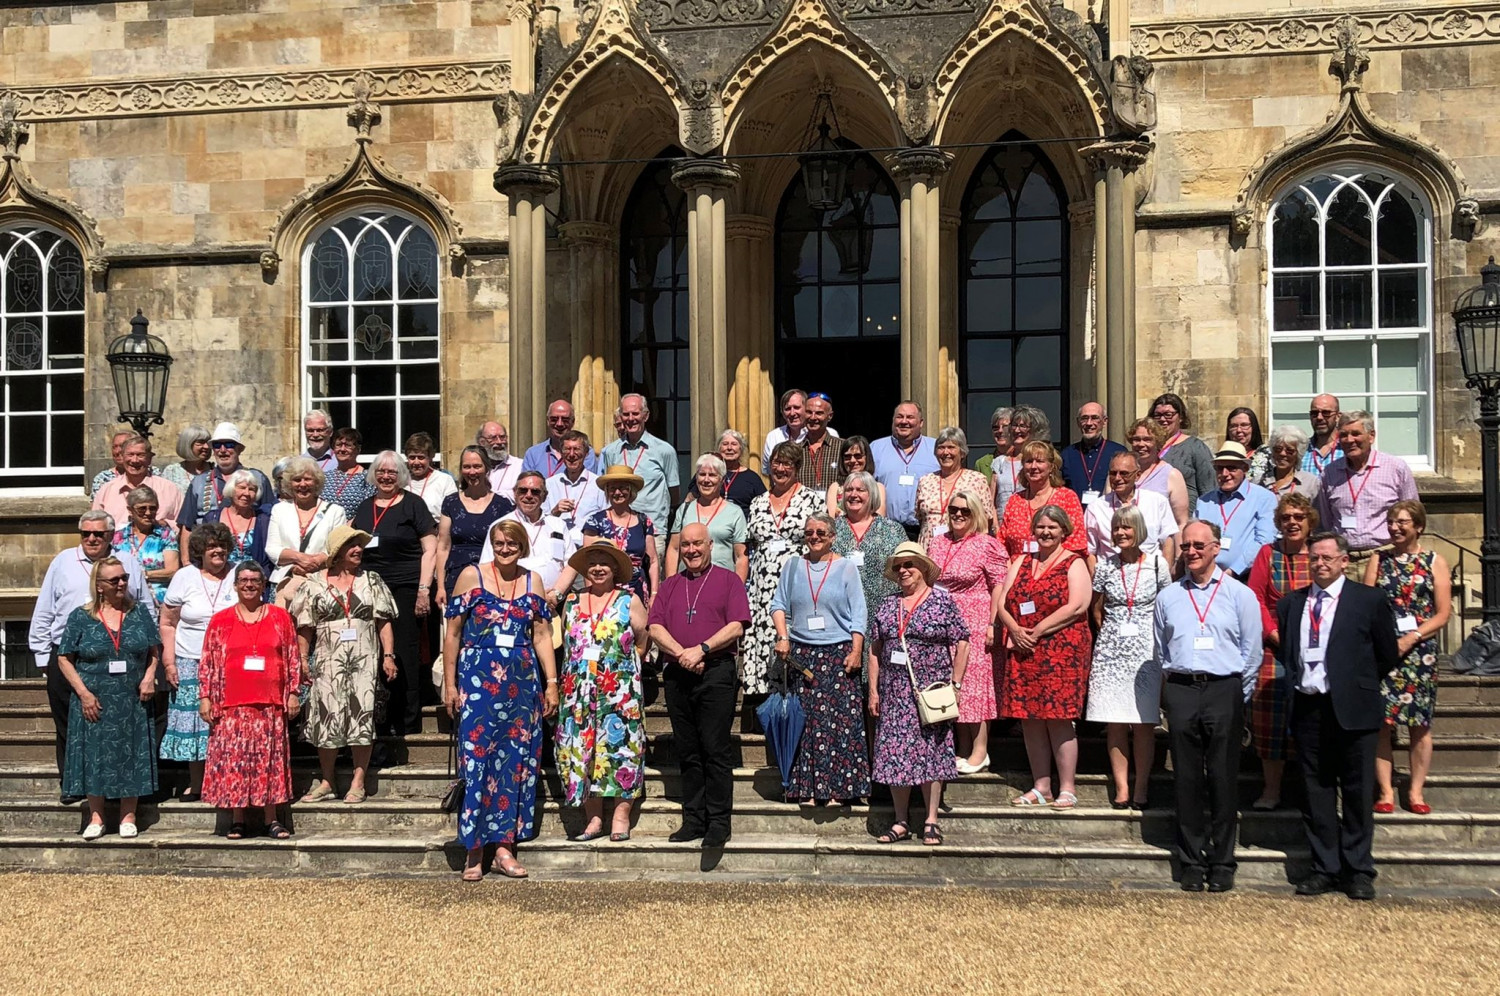 People gathered for the celebration at Bishopthorpe Palace